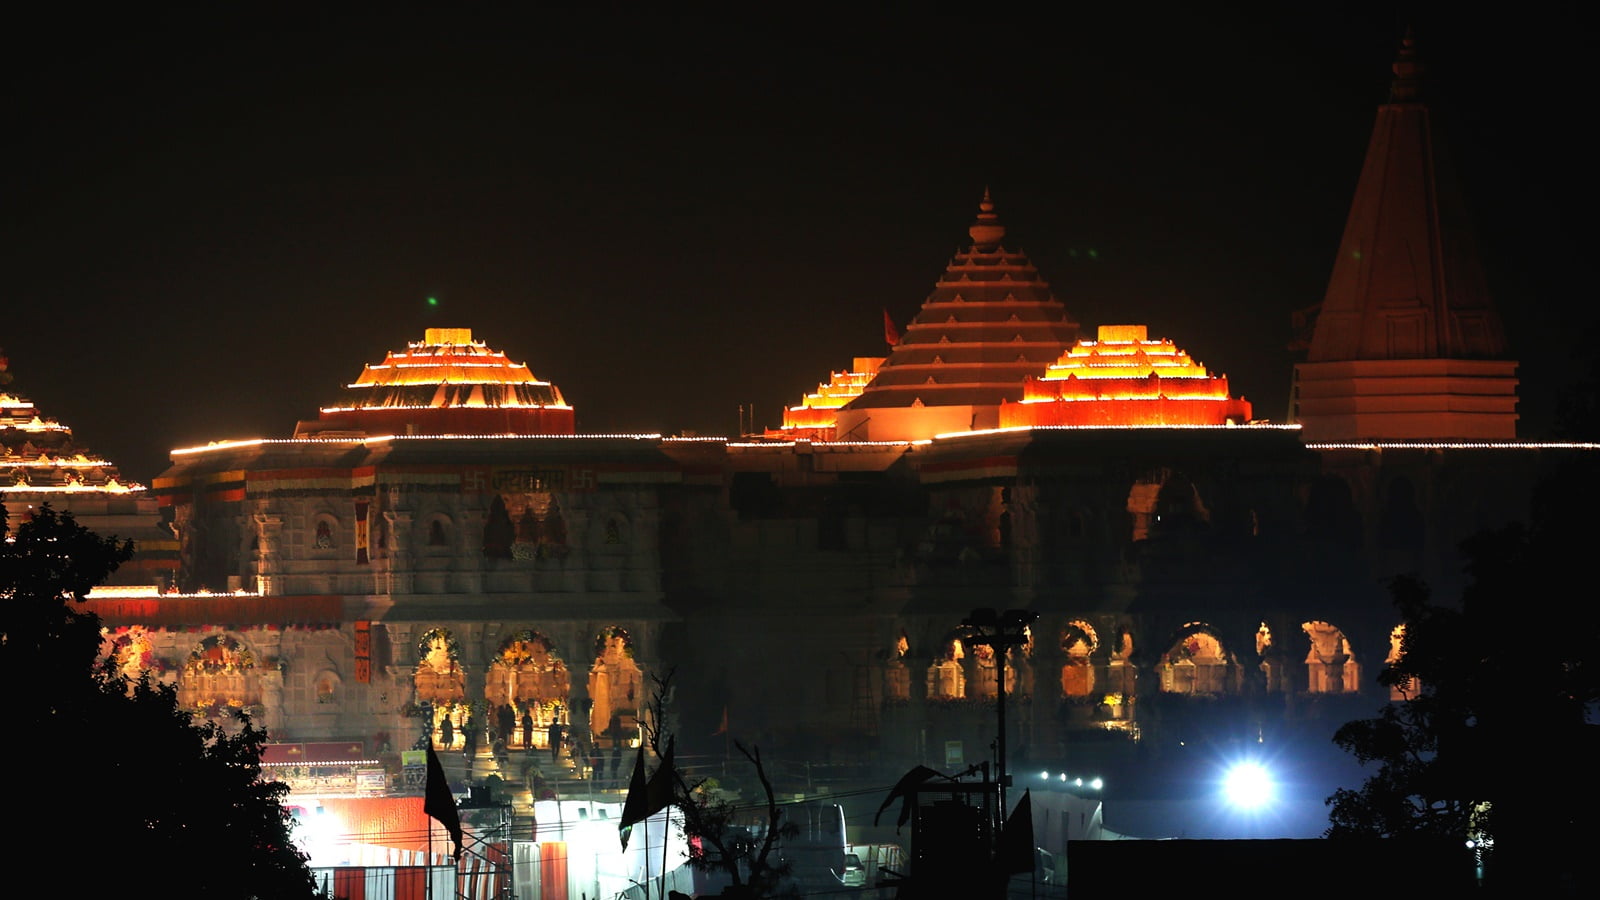 Ayodhya's temple of Ramlalla, a piece of soft diplomacy, is the center of preparation to be established as a religious and spiritual tourism hub.